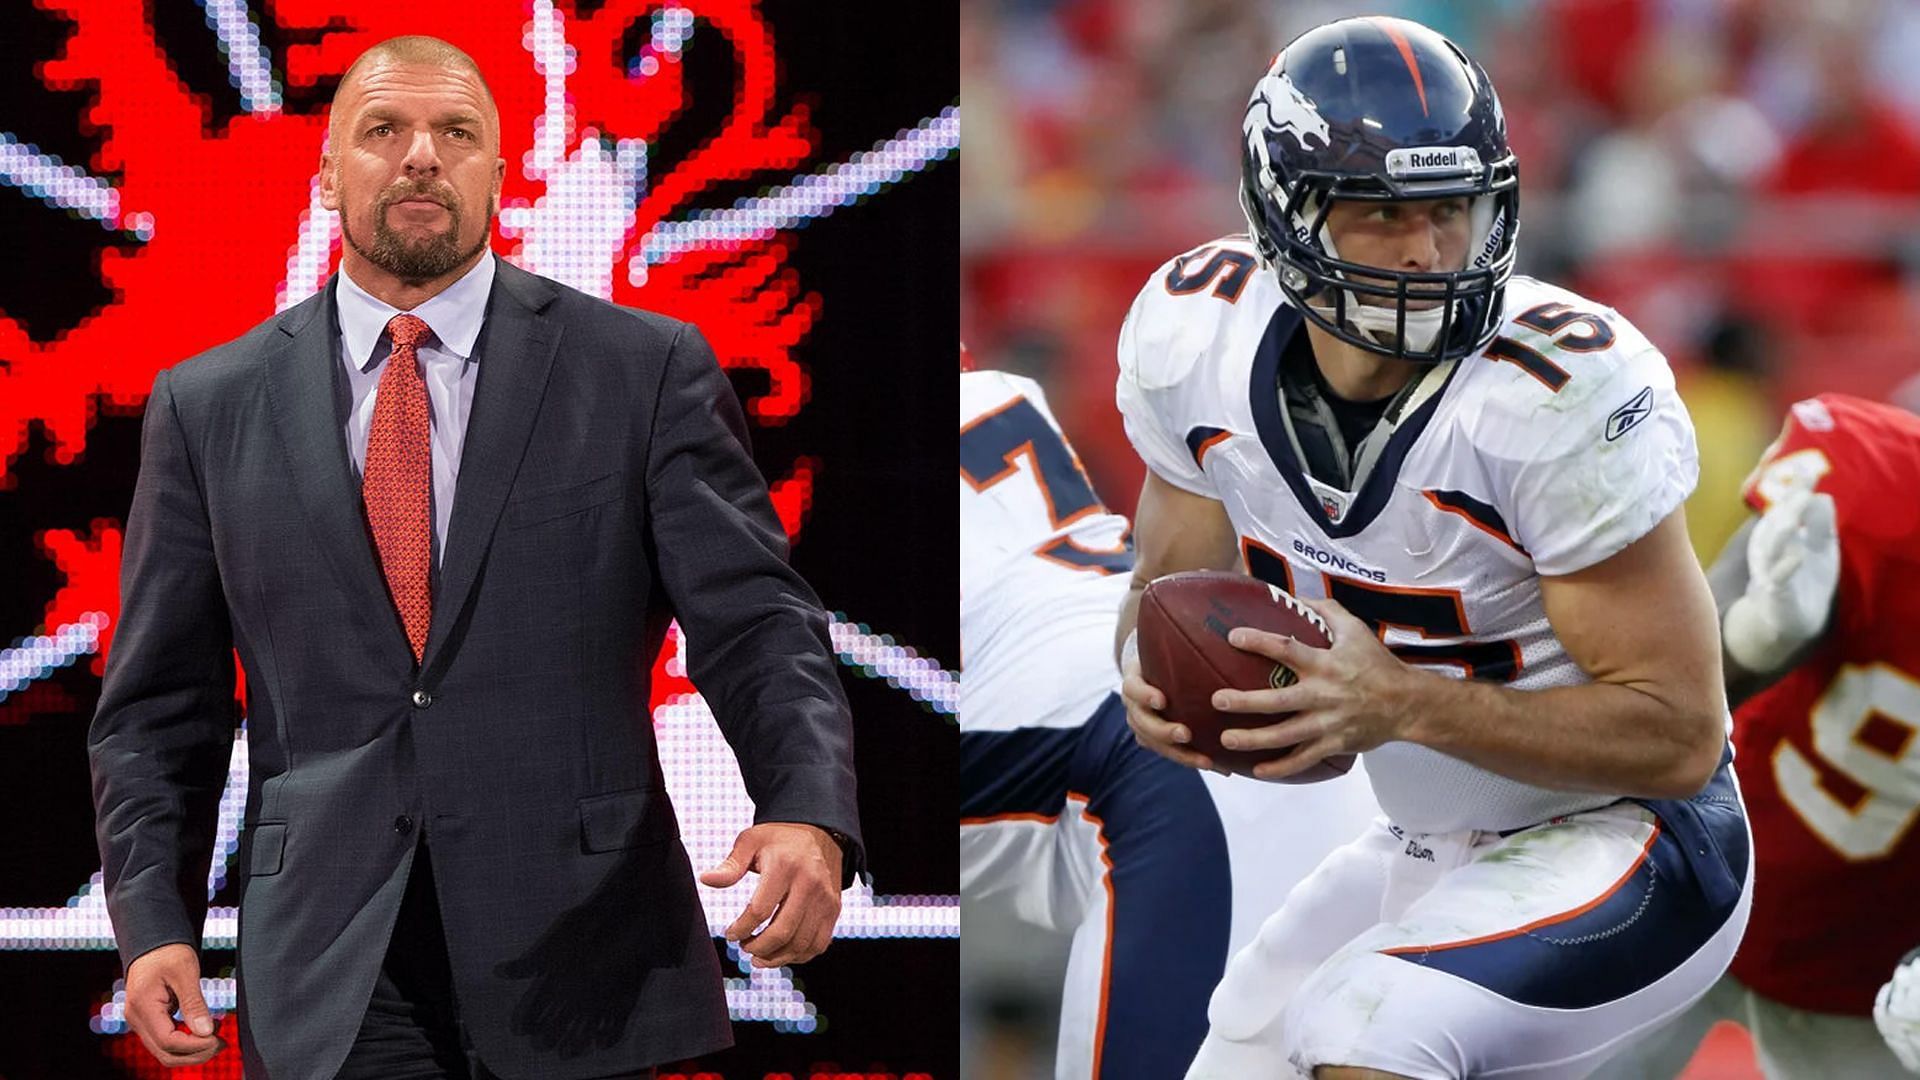 WWE CCO Triple H (left) and former NFL quarterback Tim Tebow (right)